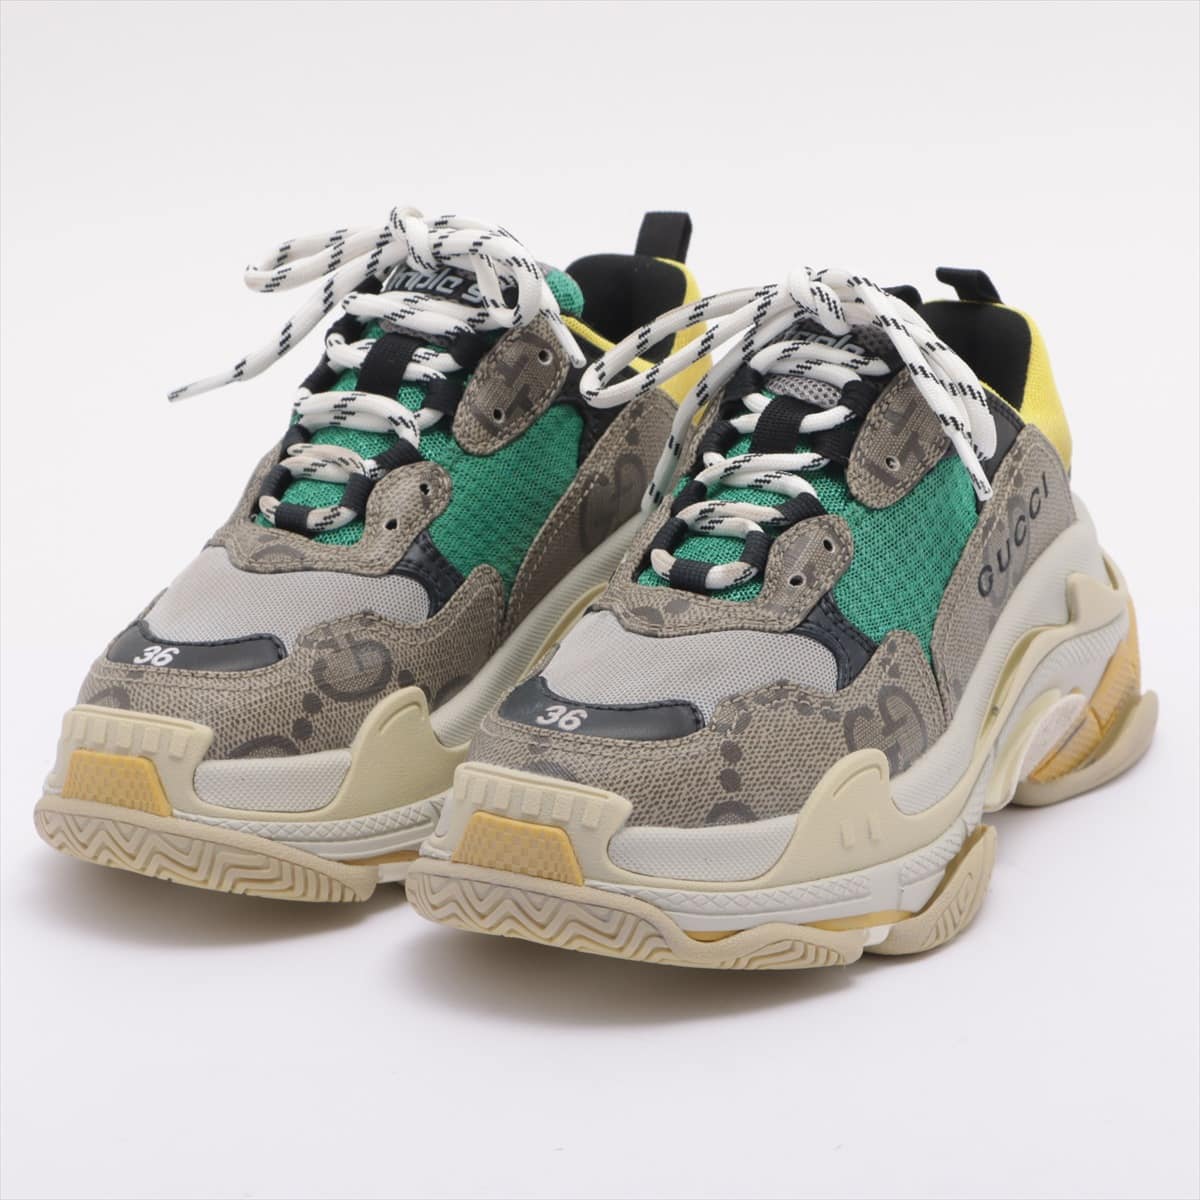 Gucci x Balenciaga Triple s 21AW Mesh x leather Sneakers 24cm Ladies' Beige The Hacker Project